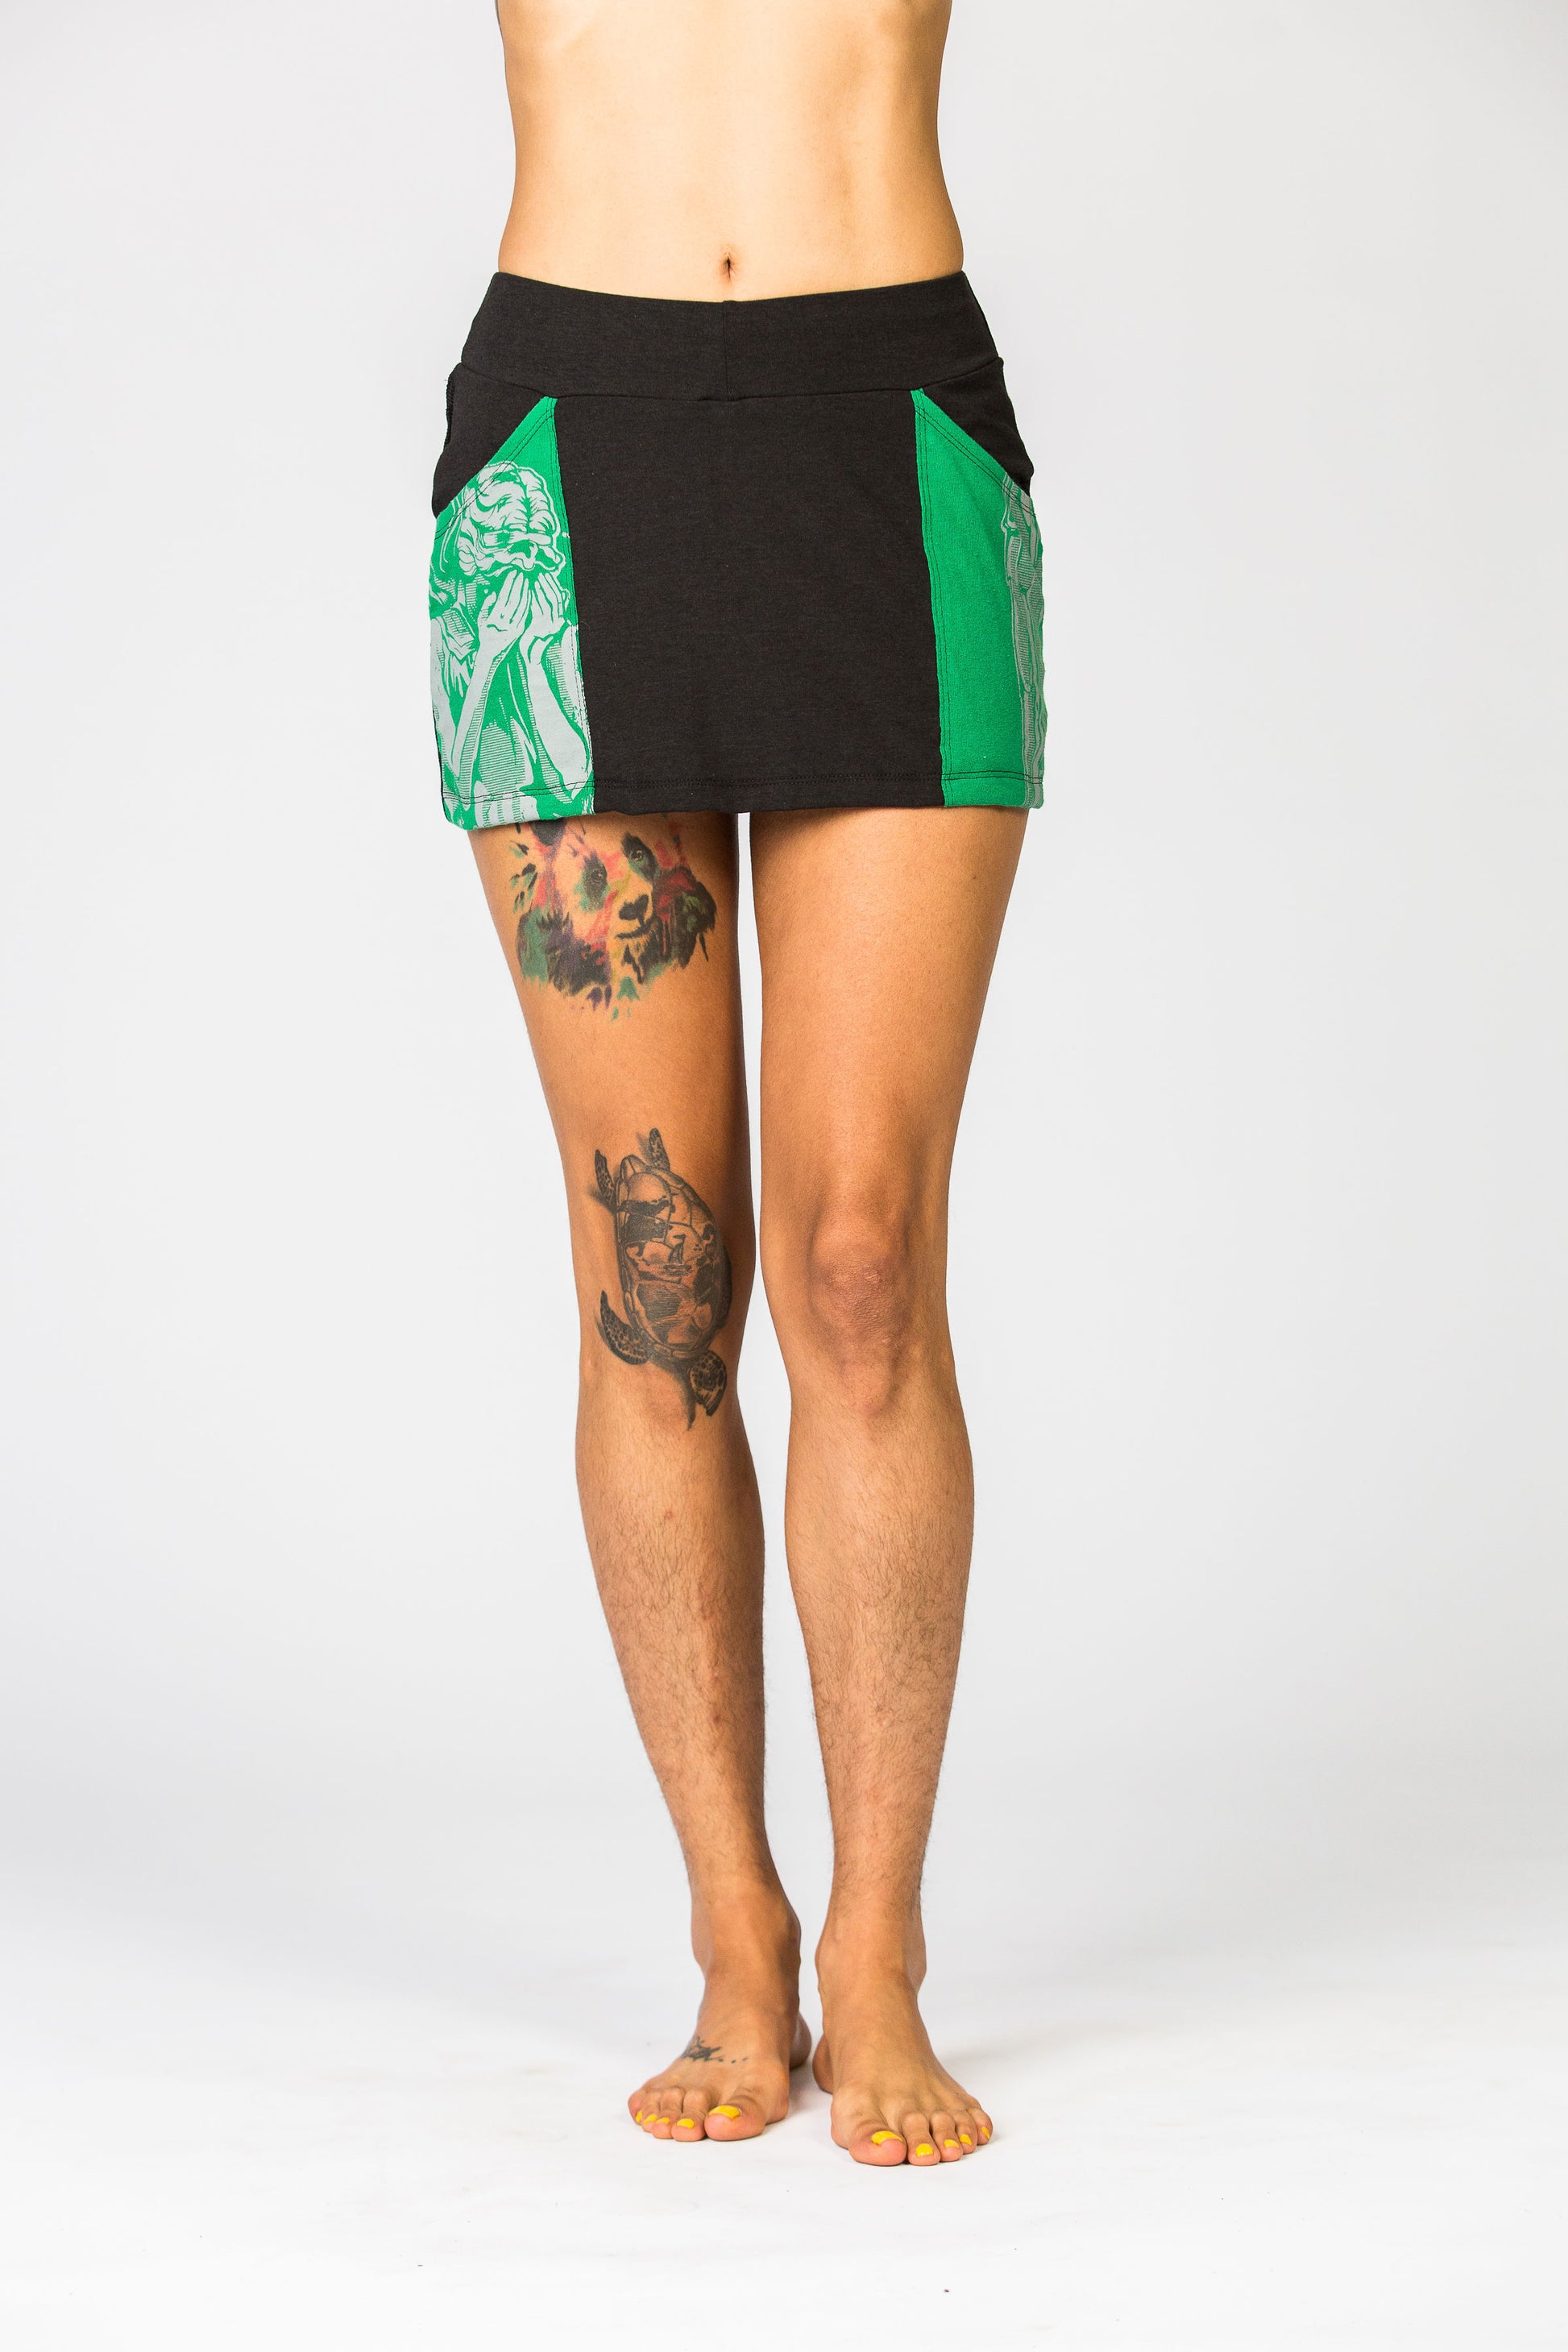 Model is wearing a black mini skirt with green pockets. 